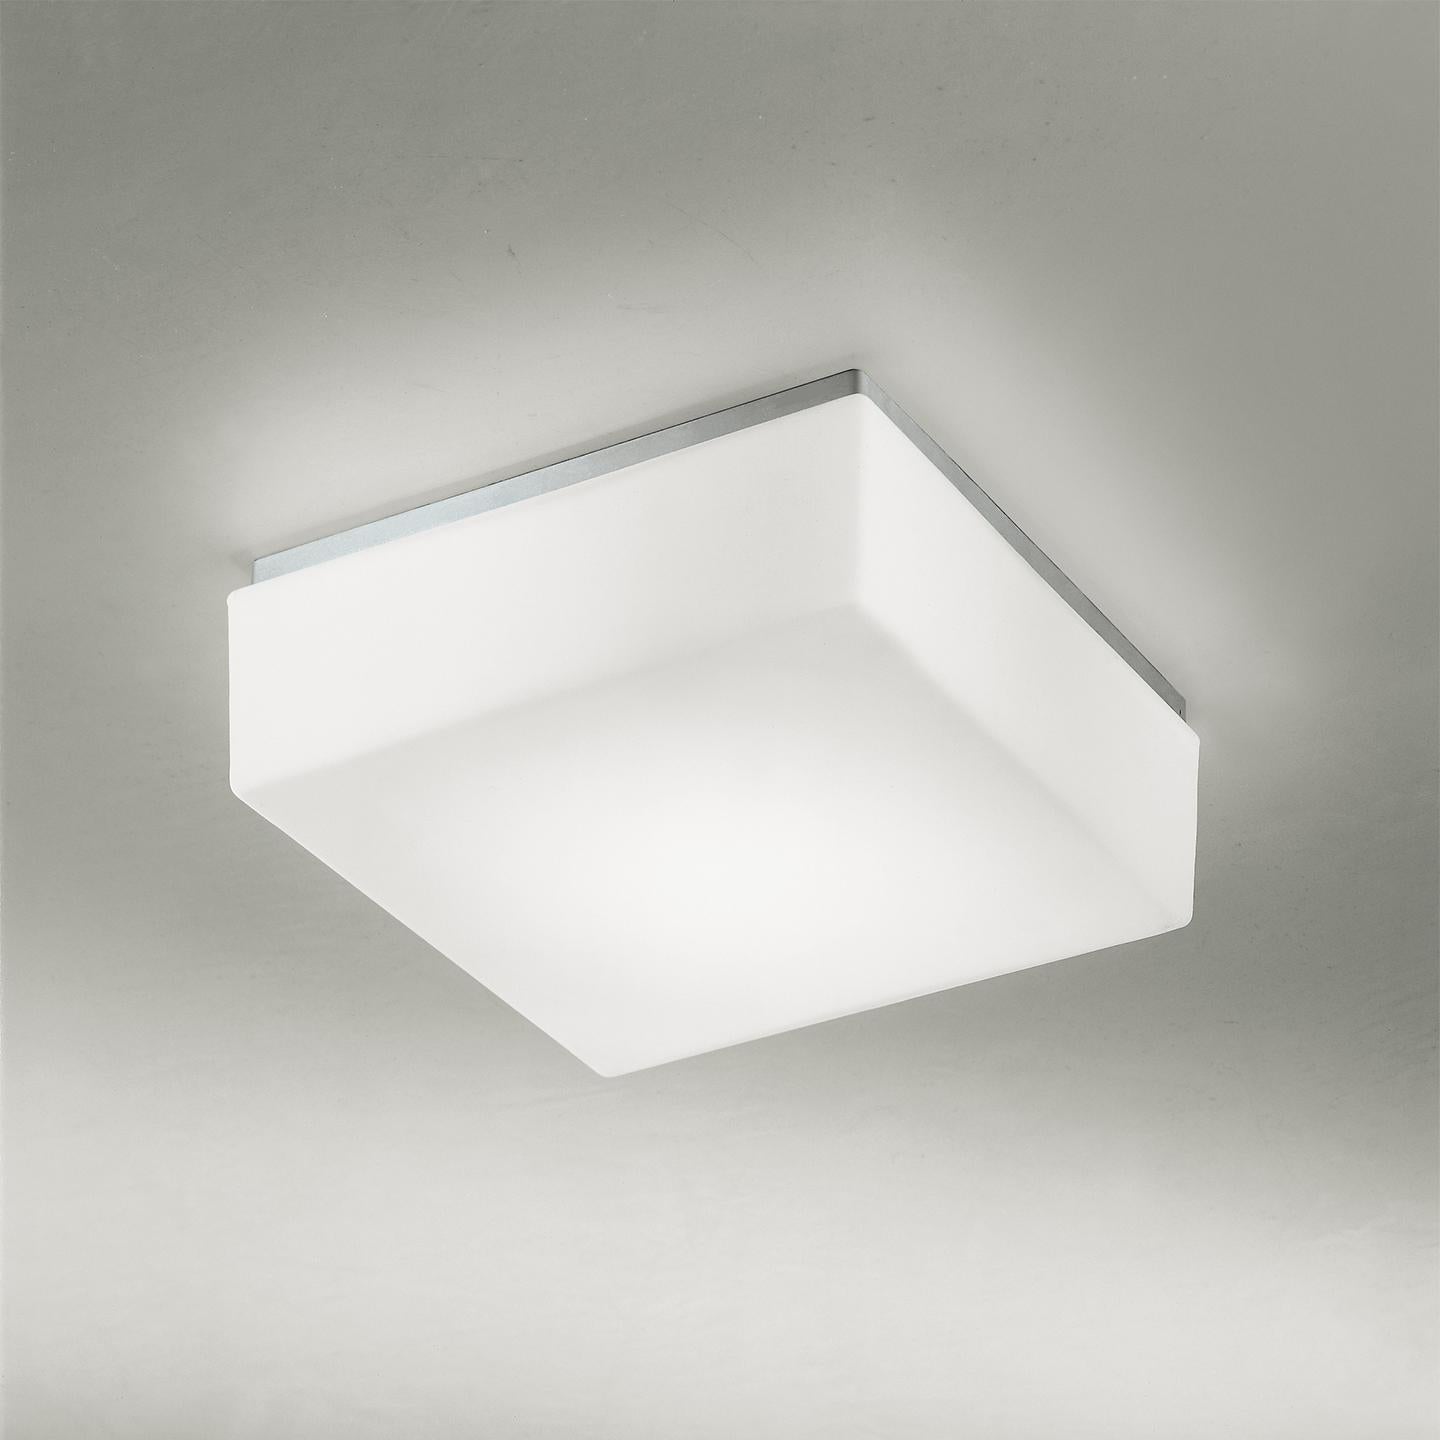 The Cubi Ceiling/Wall Lamp, designed in 2000, is an icon of Leucos. Its cubic form is surprising for handmade glass, which makes it a delightful lamp. Its hand-blown satin white diffuser is made of multiple layers of glass to create a rich, white